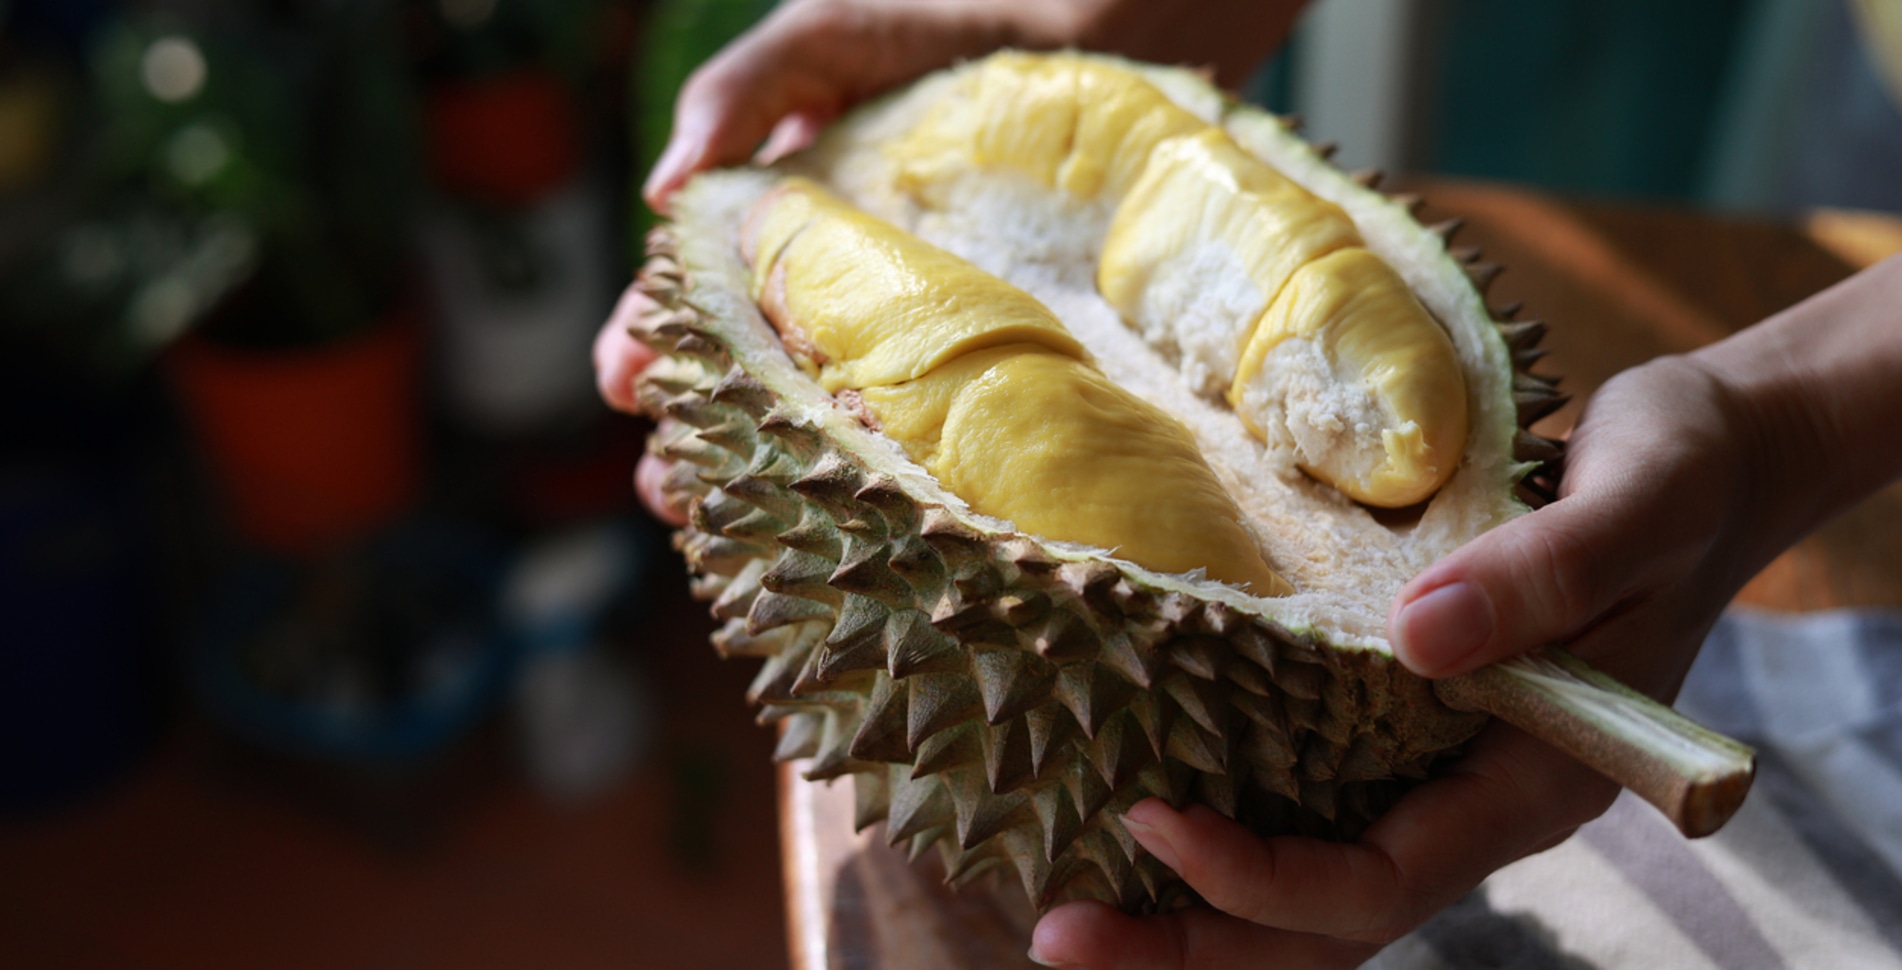 It's So Stinky! But the Nutrient-Packed Durian Is a Must-Try Fruit